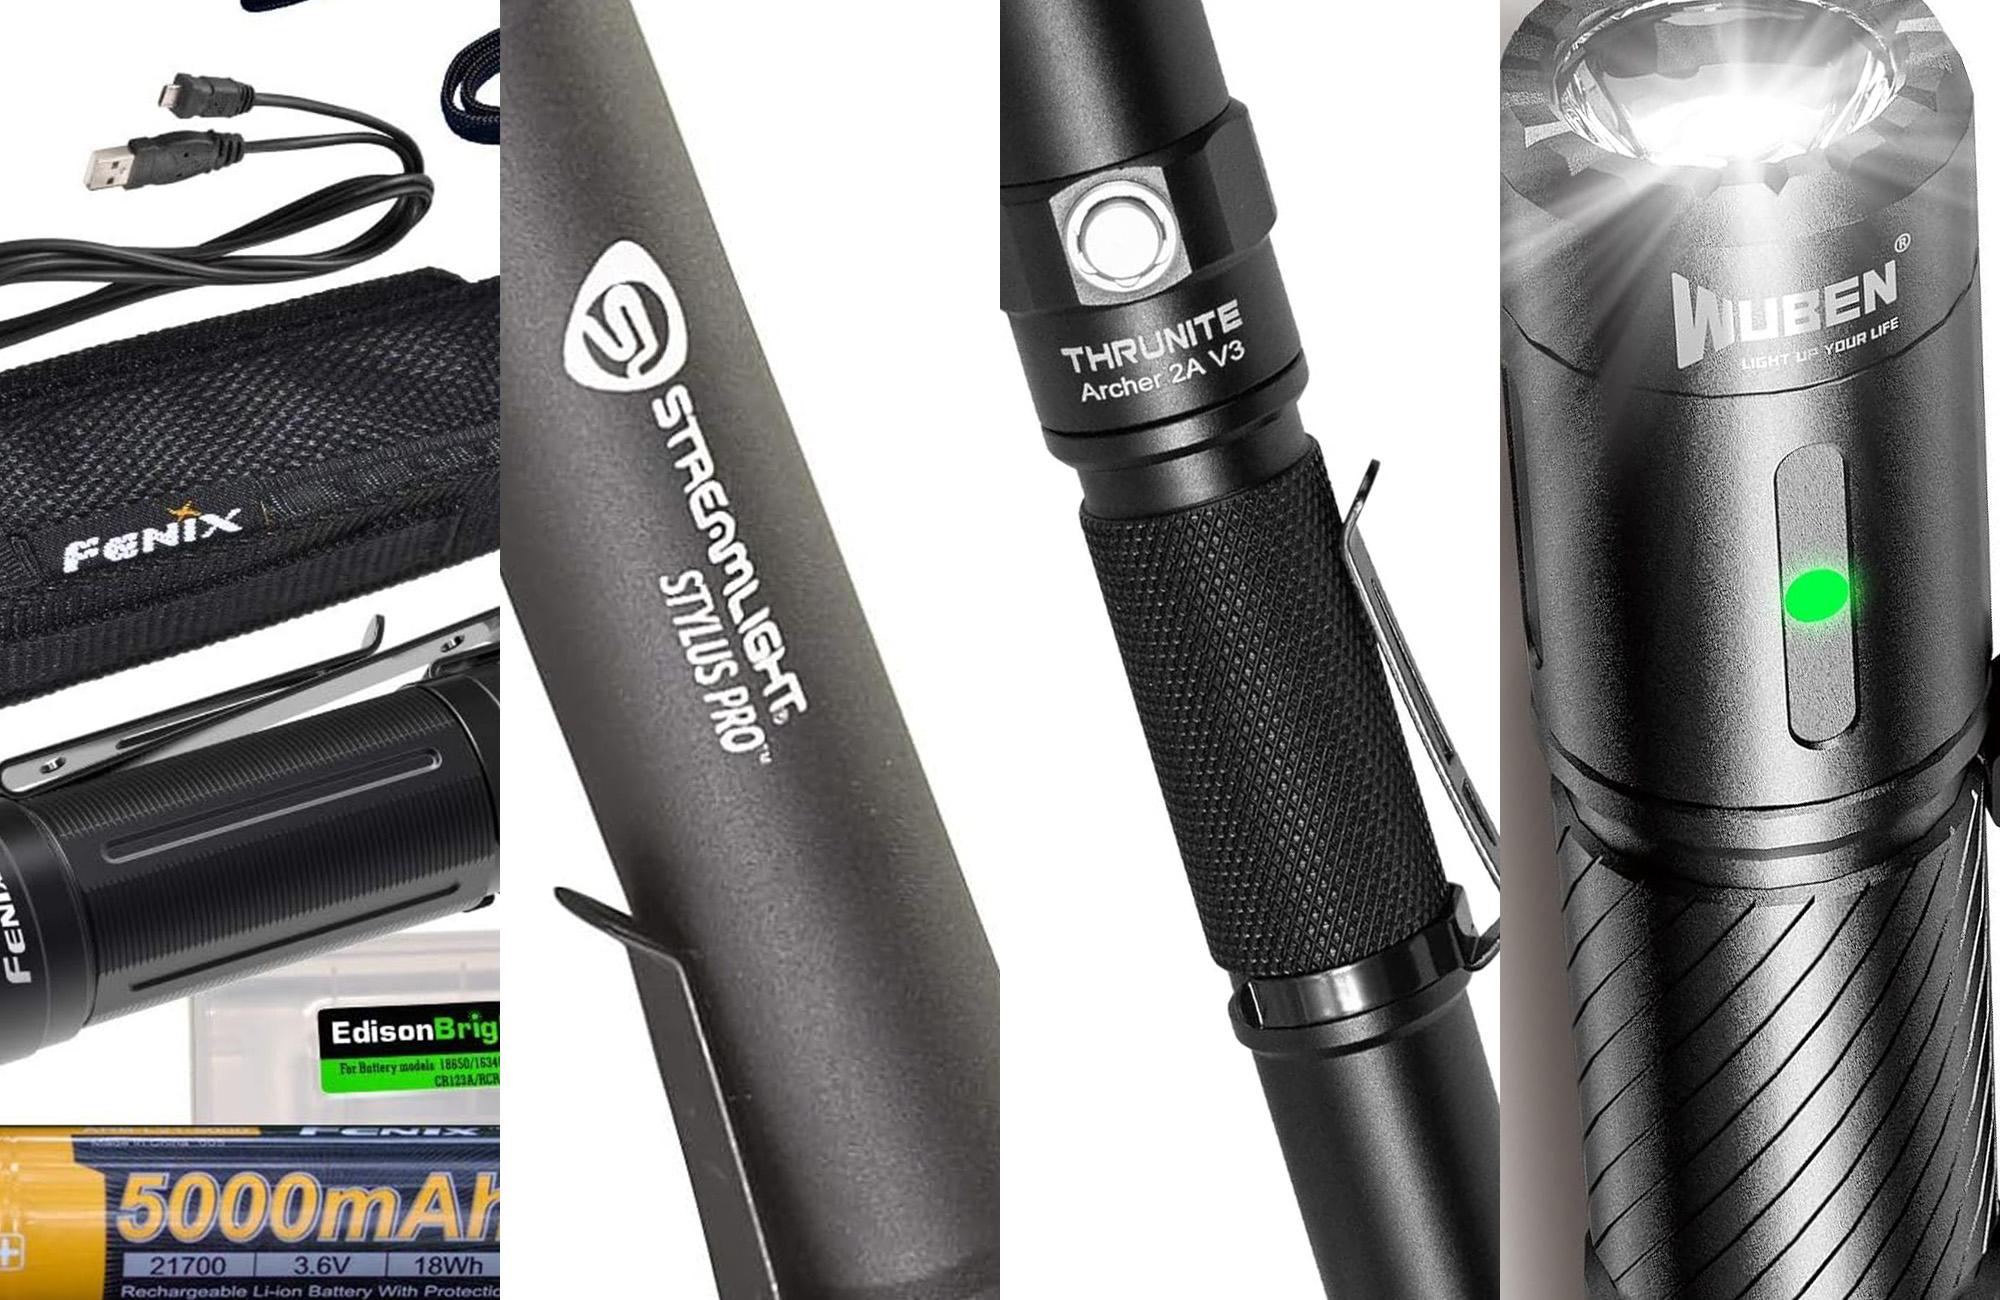 Best Mini Flashlights (Review & Buying Guide) in 2023